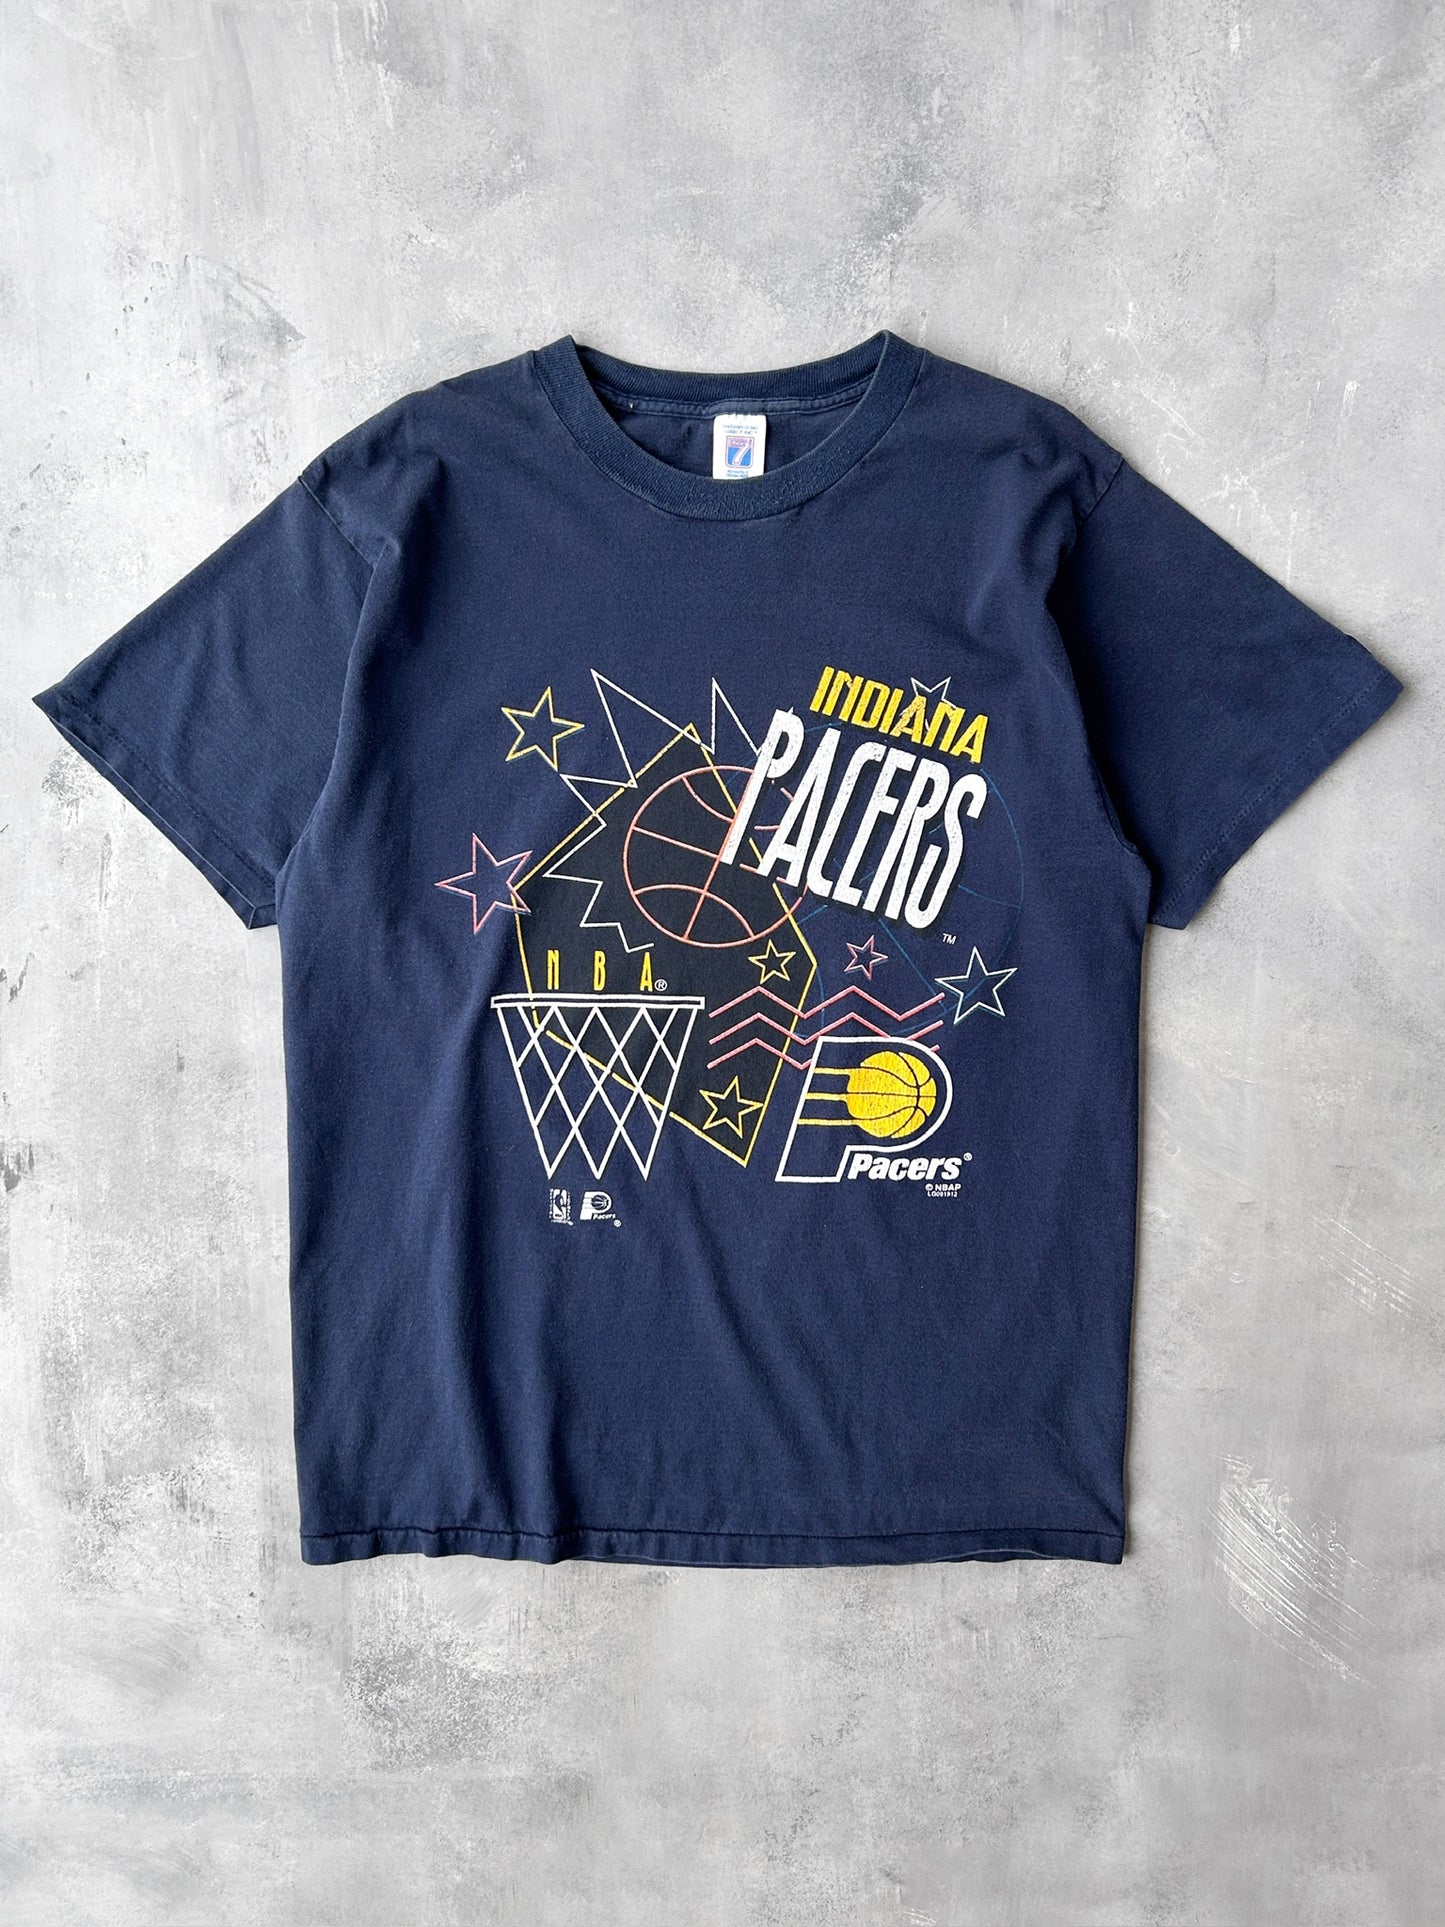 Indiana Pacers T-Shirt 90's - XL